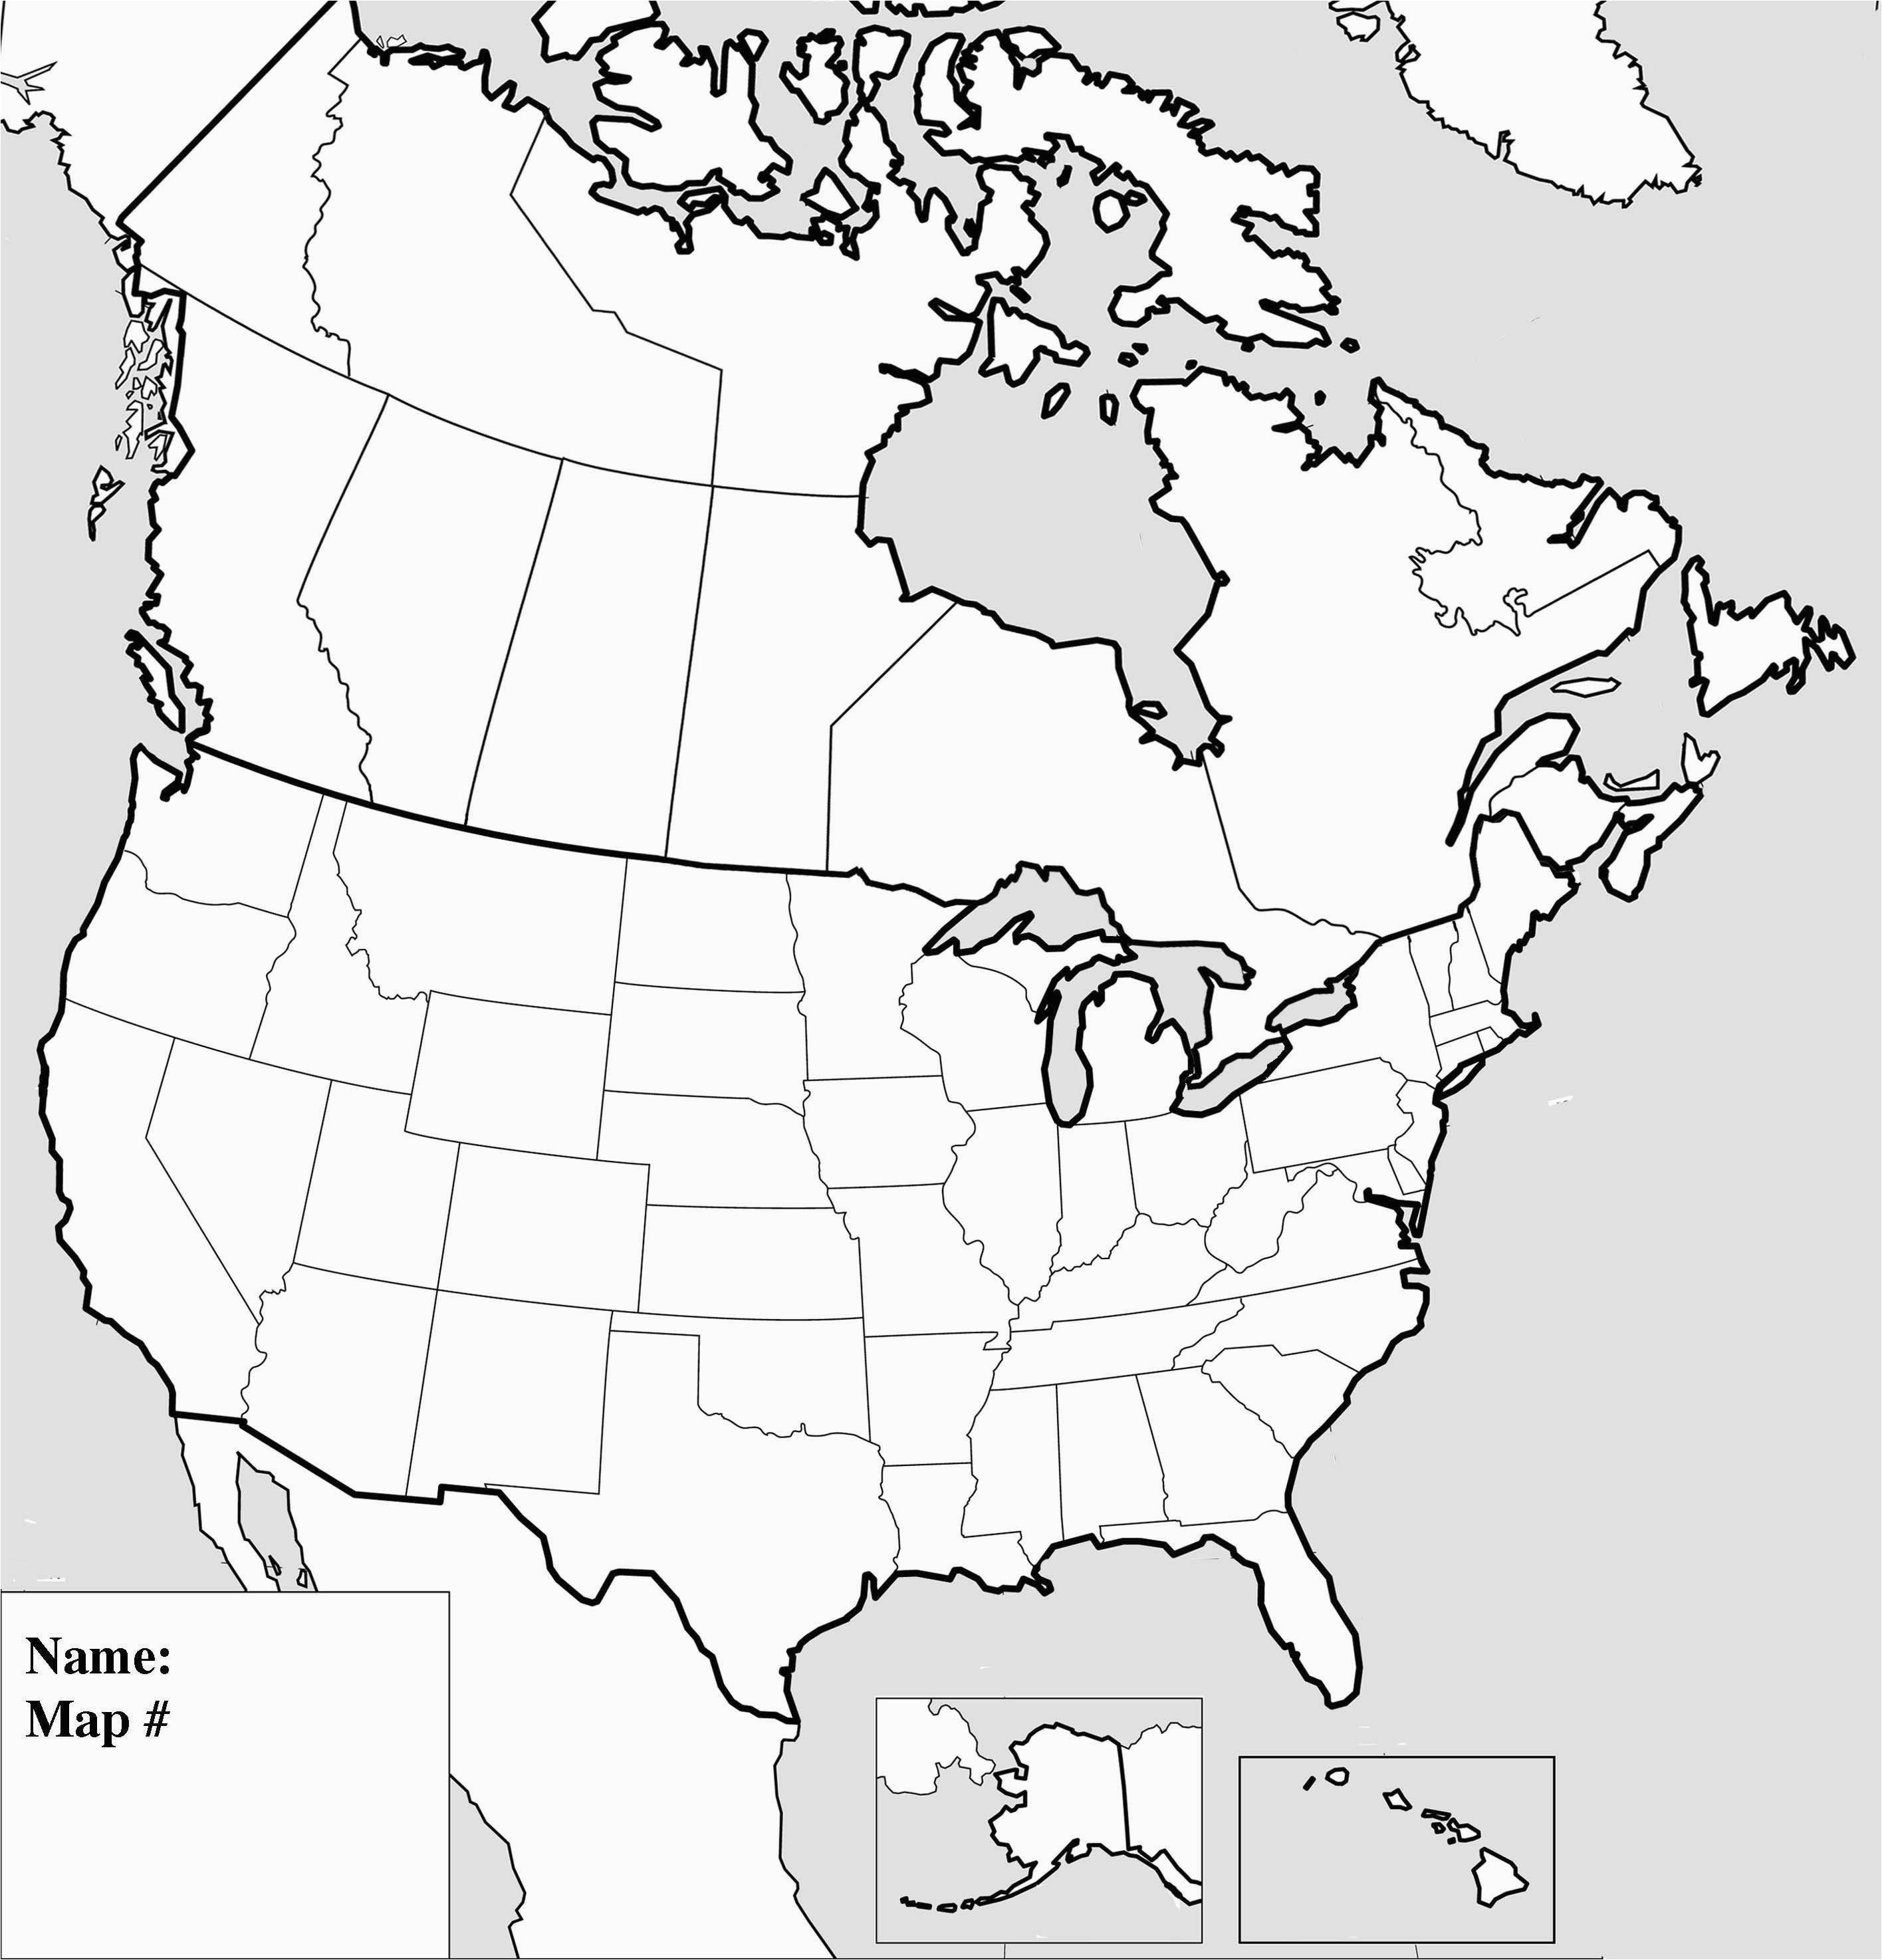 Blank Map Of Canada and Usa Printable Map Us and Canada Refrence Canada Map Printable